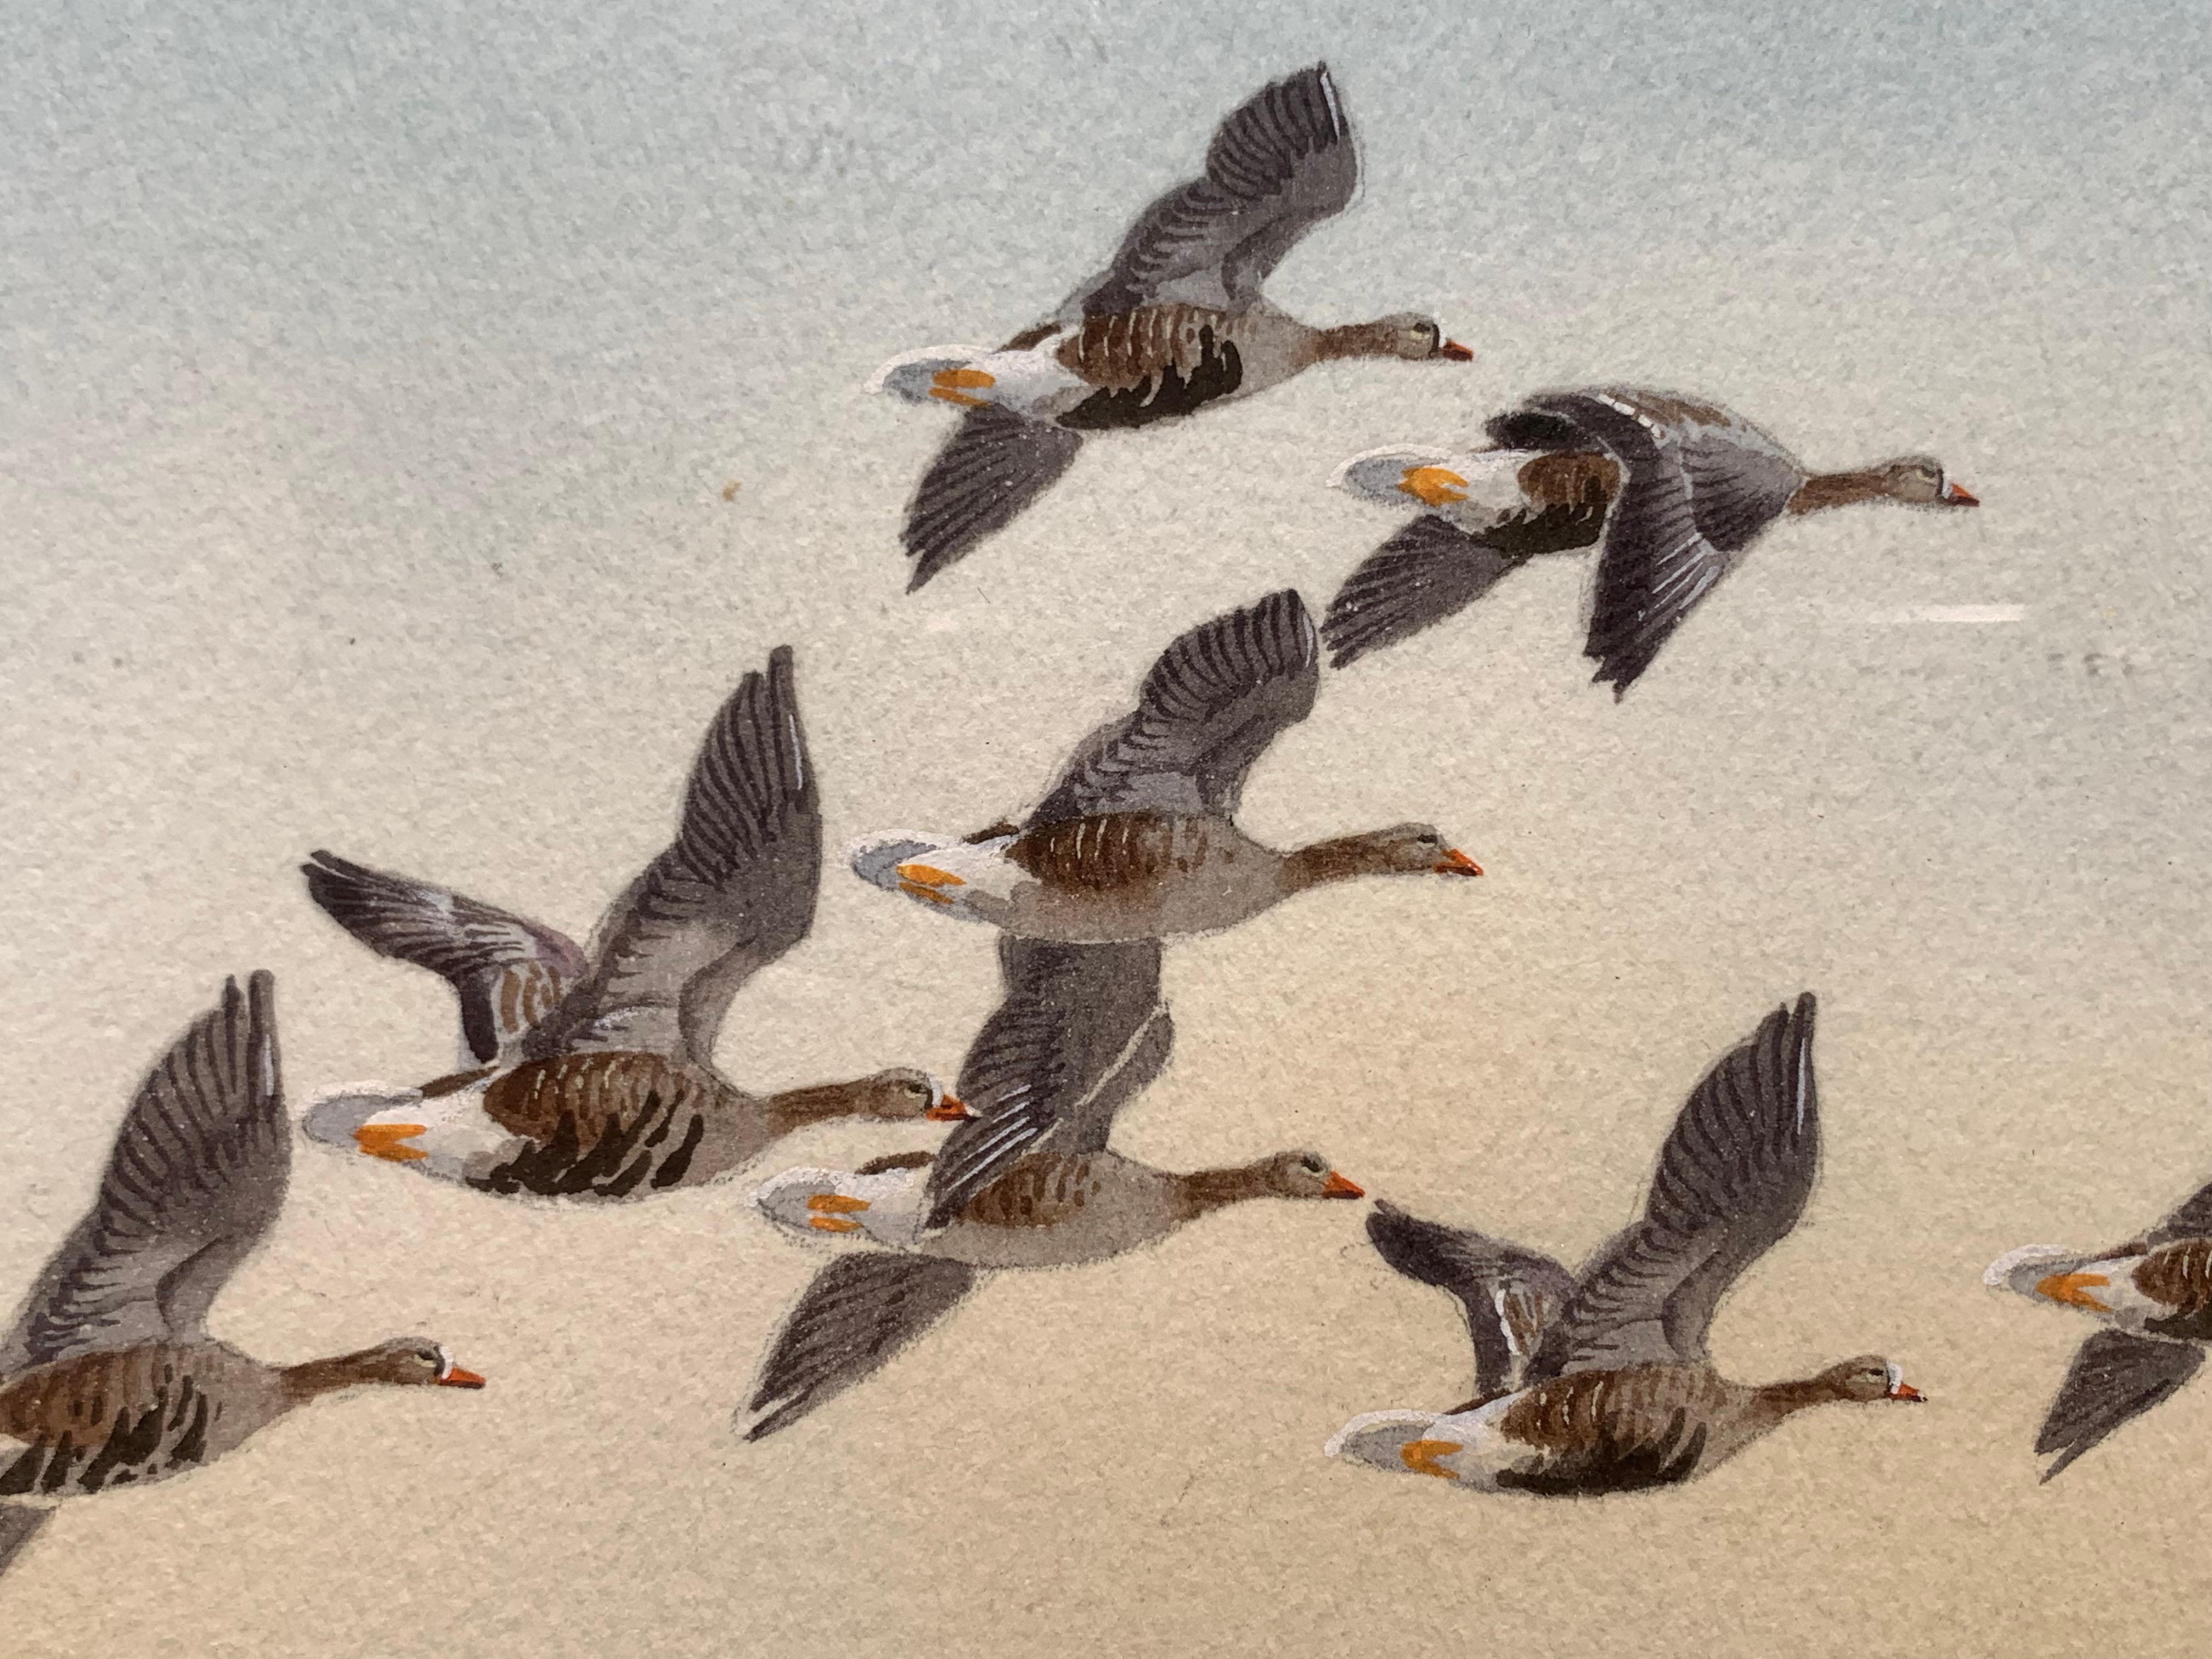 White Fronts Along the Coast (White Fronted Geese, Ireland Landscape) - Art by Robert W. Milliken